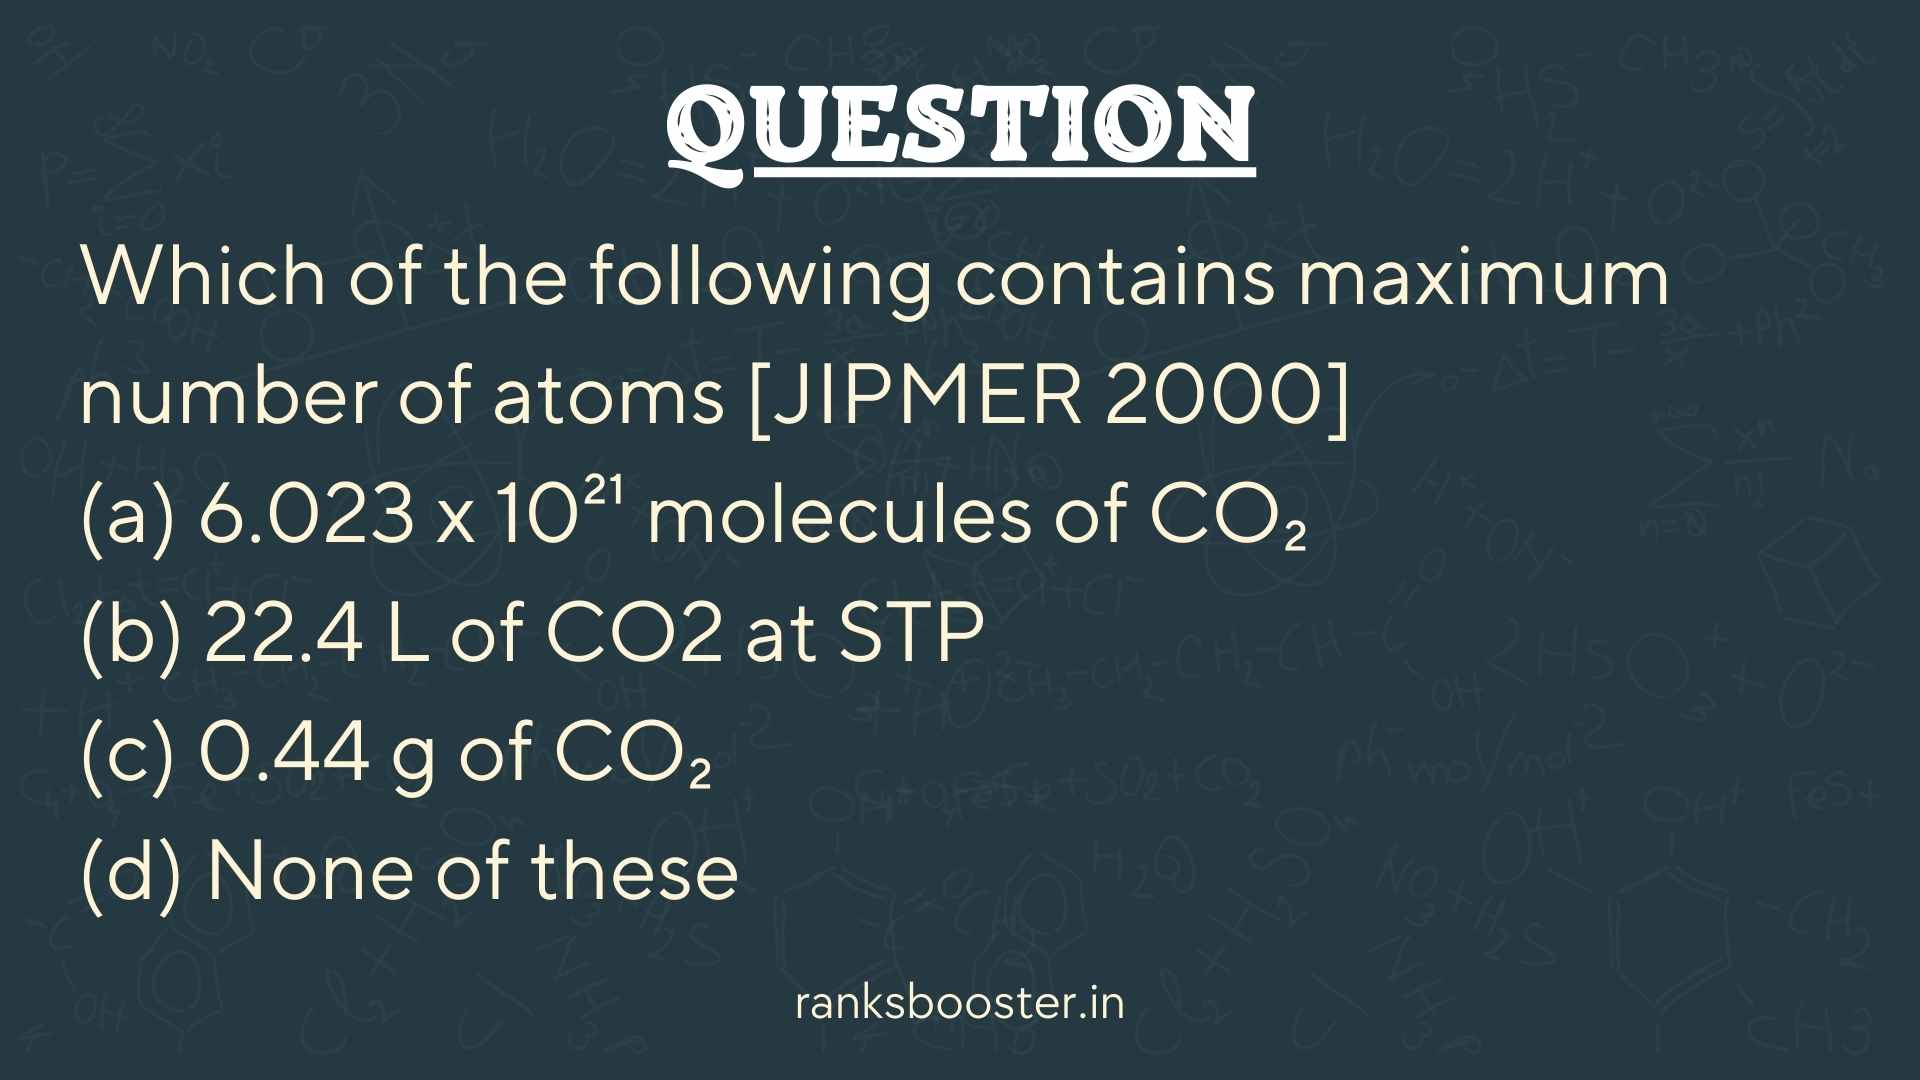 Question: Which of the following contains maximum number of atoms [JIPMER 2000] (a) 6.023 x 10²¹ molecules of CO₂ (b) 22.4 L of CO₂ at STP (c) 0.44 g of CO₂ (d) None of these